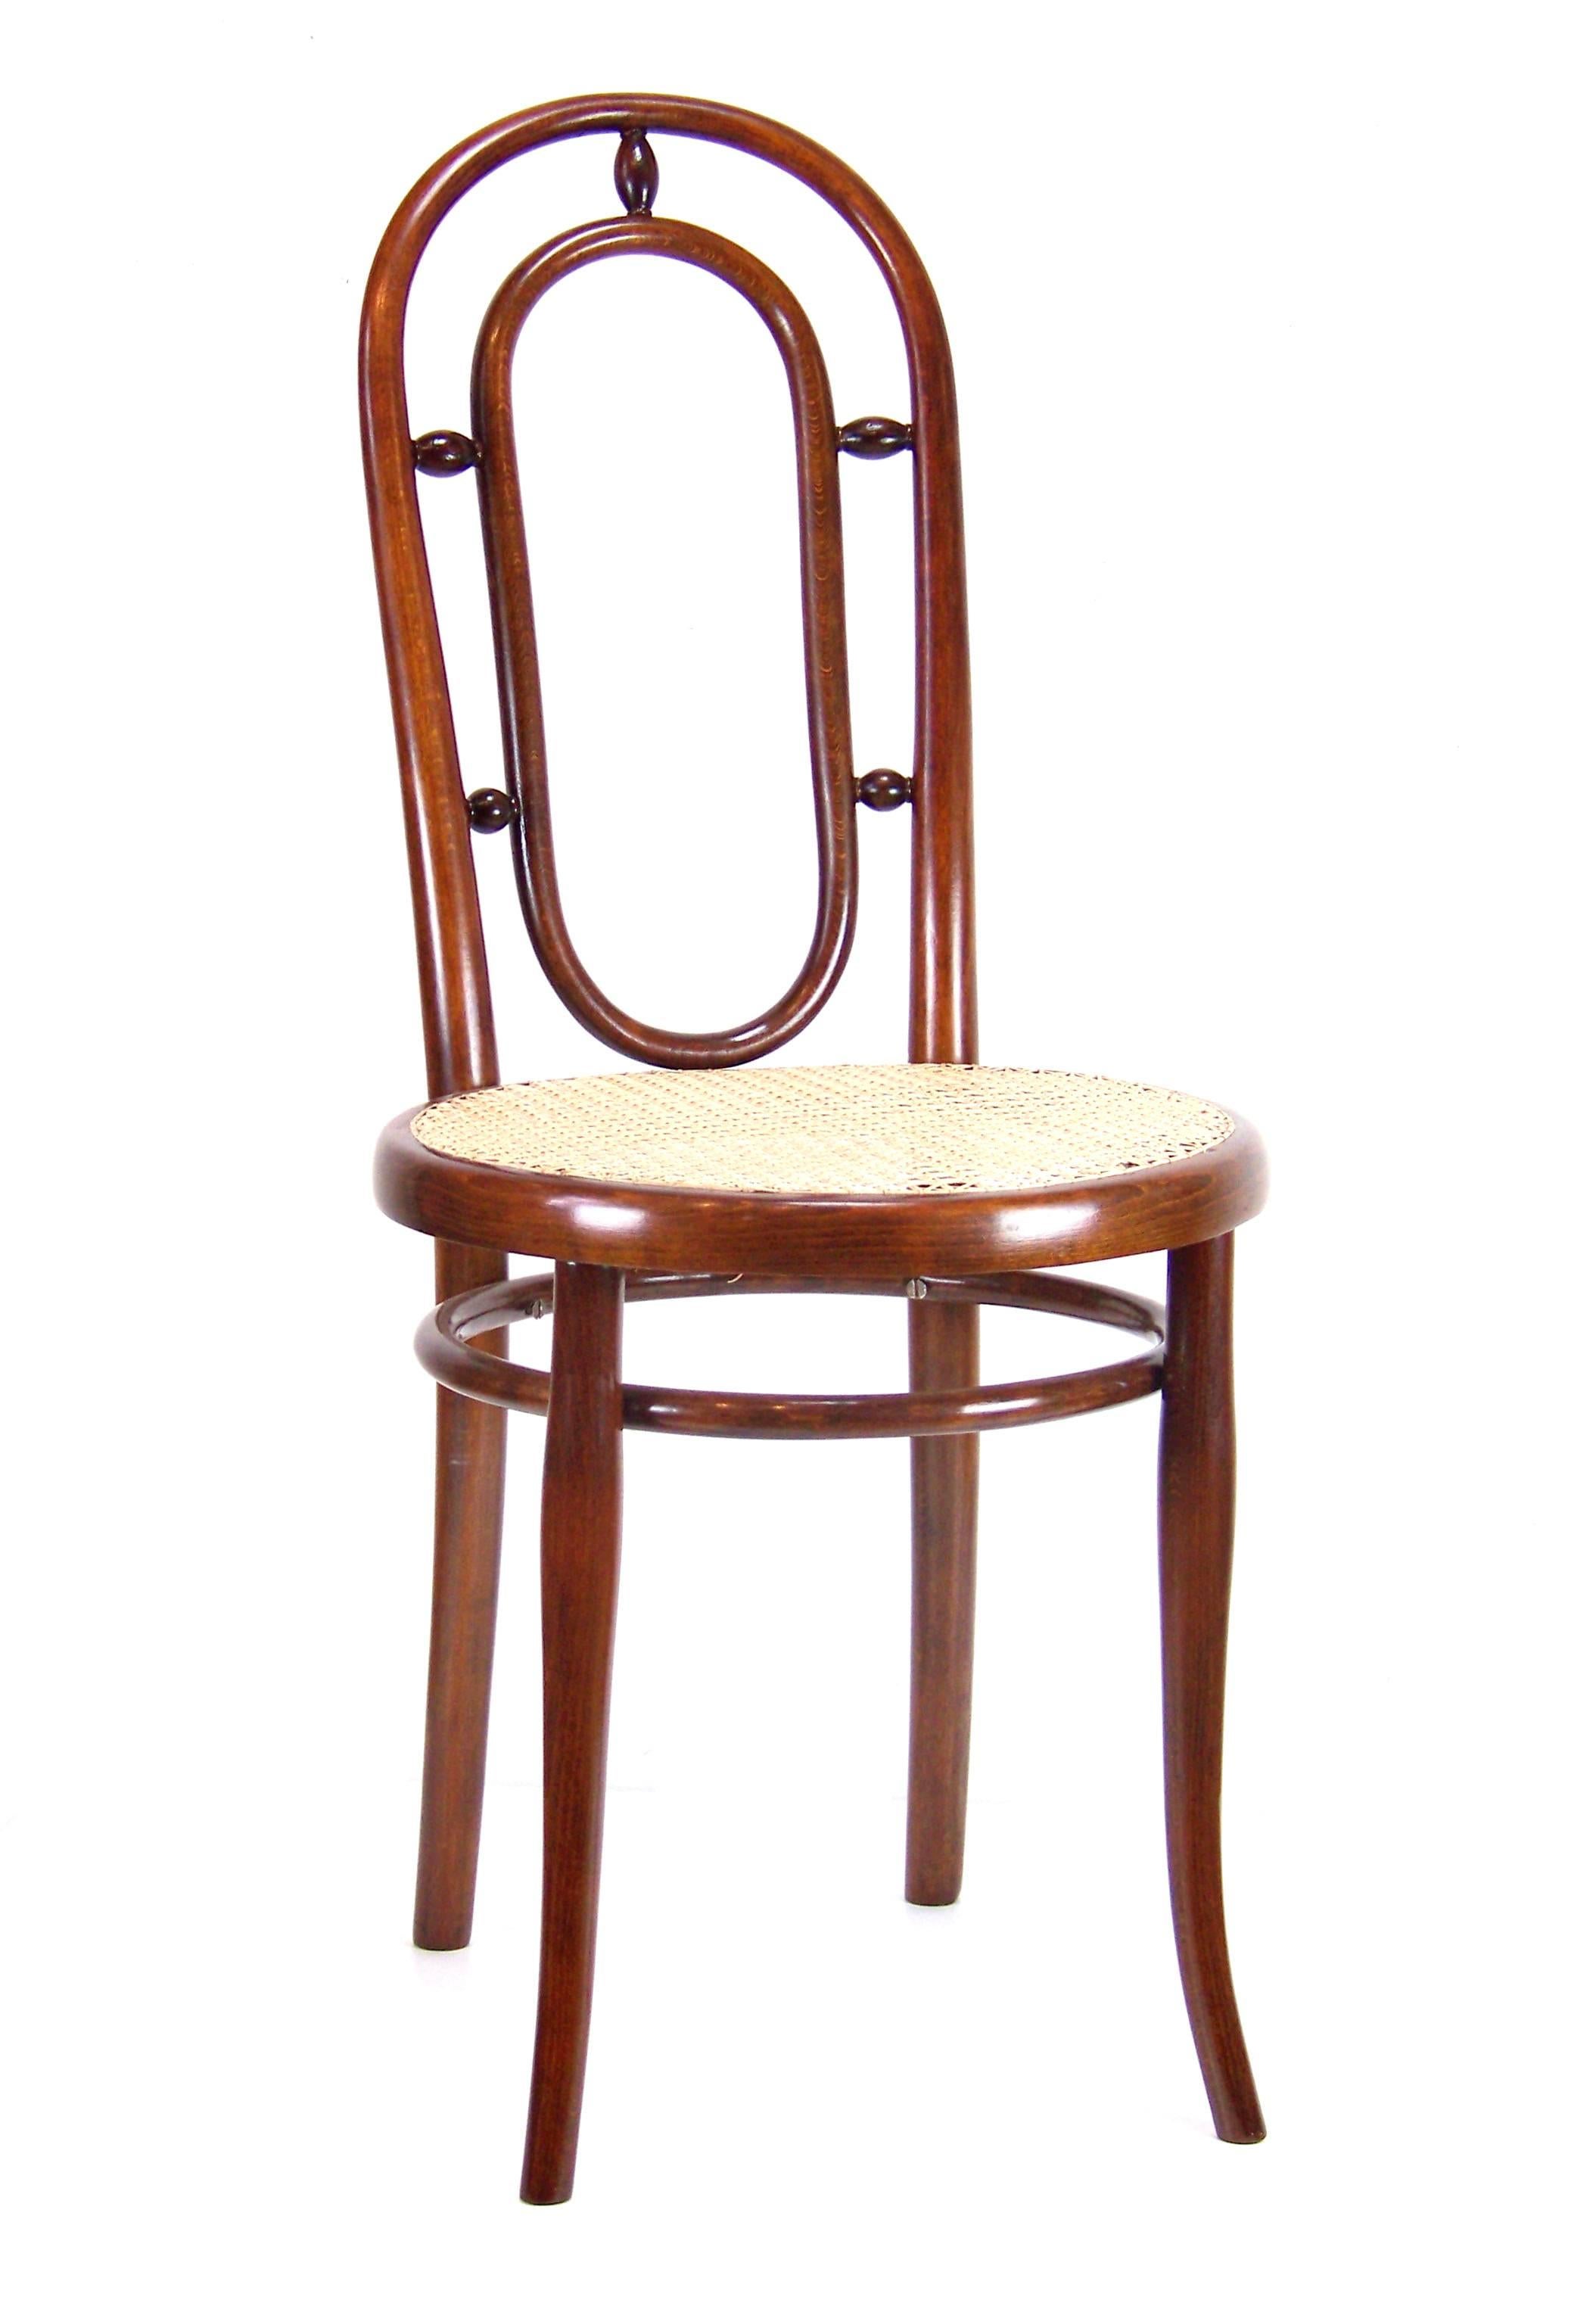 Viennese chair Thonet Nr. 17 was included in the production program of the company Gebrüder Thonet around Year 1865. Original 'Thonet' stamp under the seat is used between the year 1987-1910. Original restored polish.